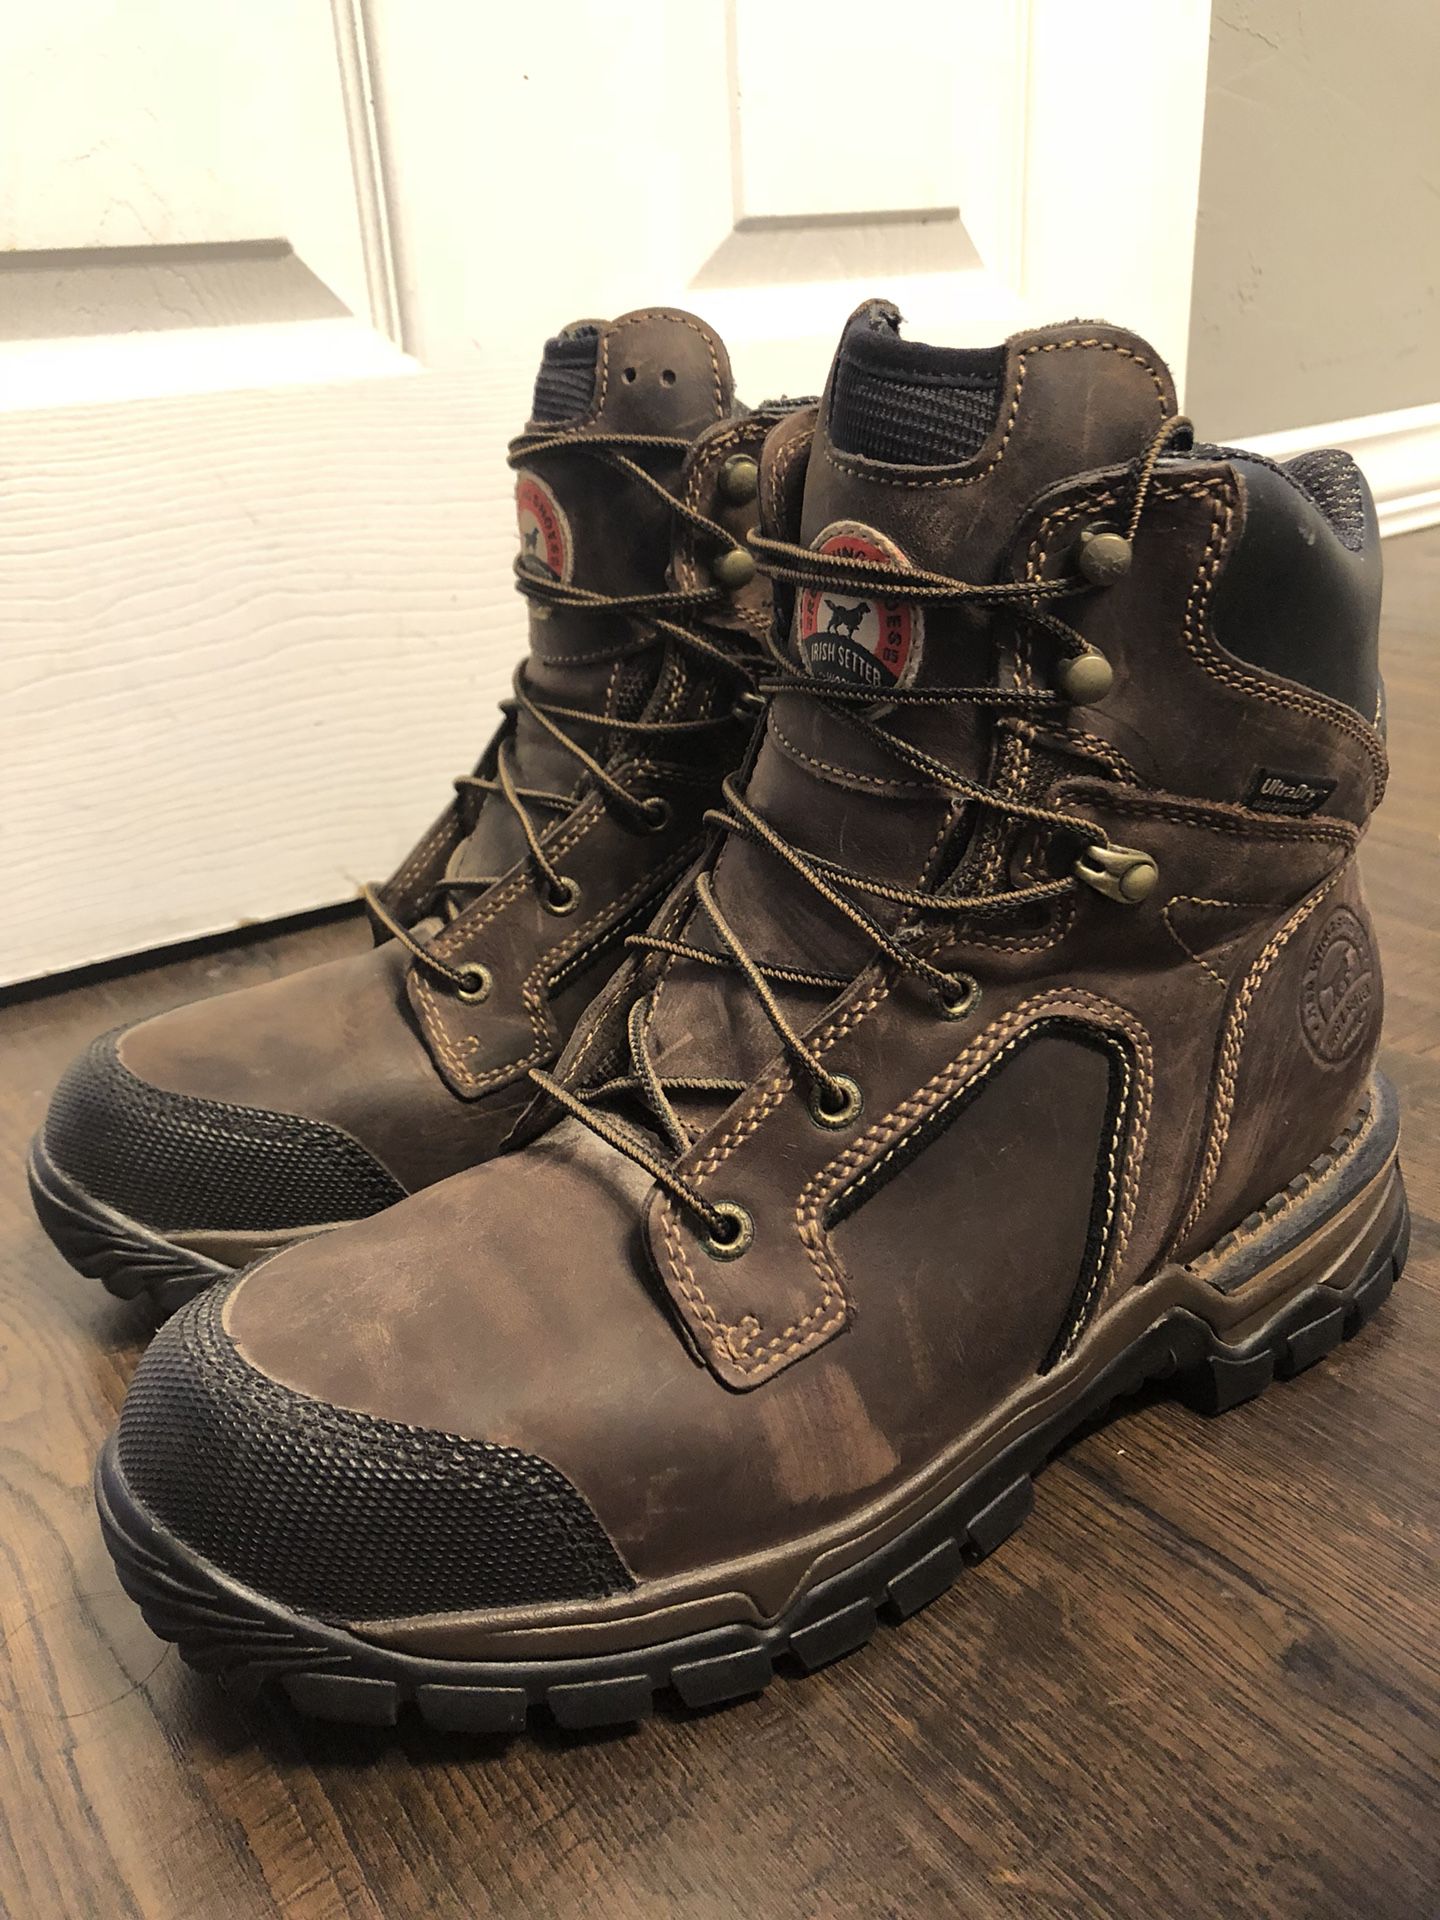 Never Used Red Wing Irish Setter Work Boot. $75 obo